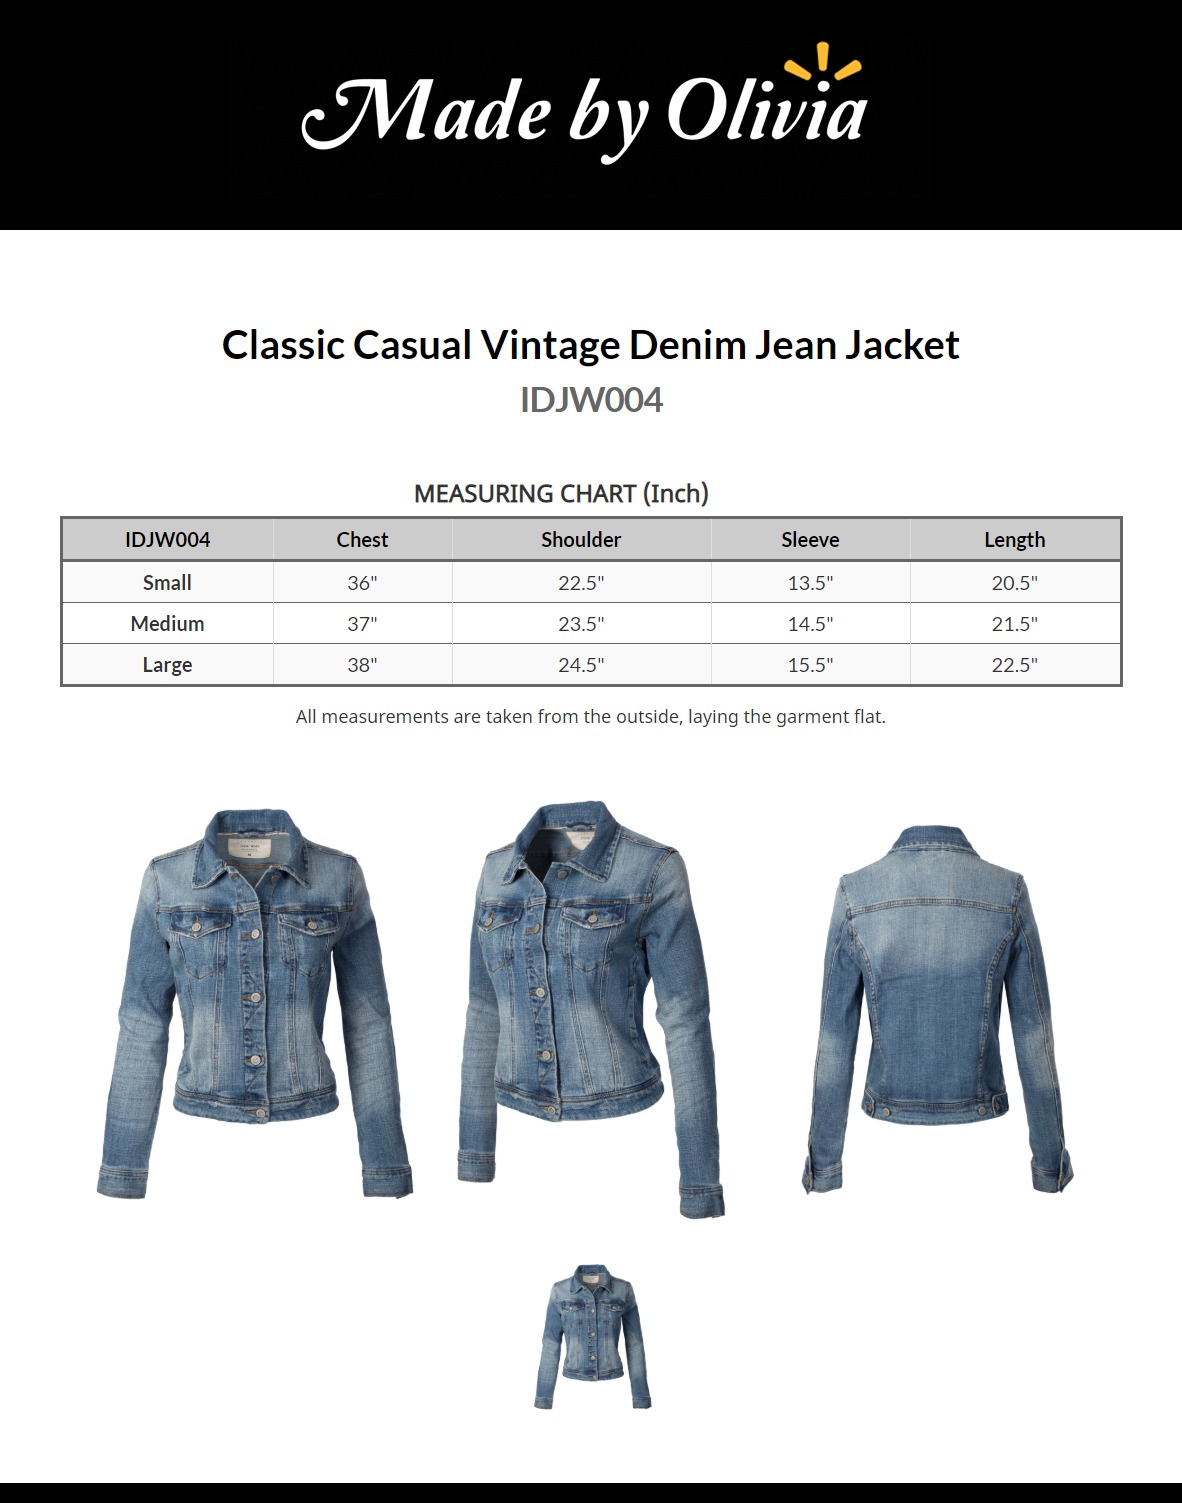 Made by Olivia Women's Classic Casual Vintage Denim Jean Jacket - image 2 of 5